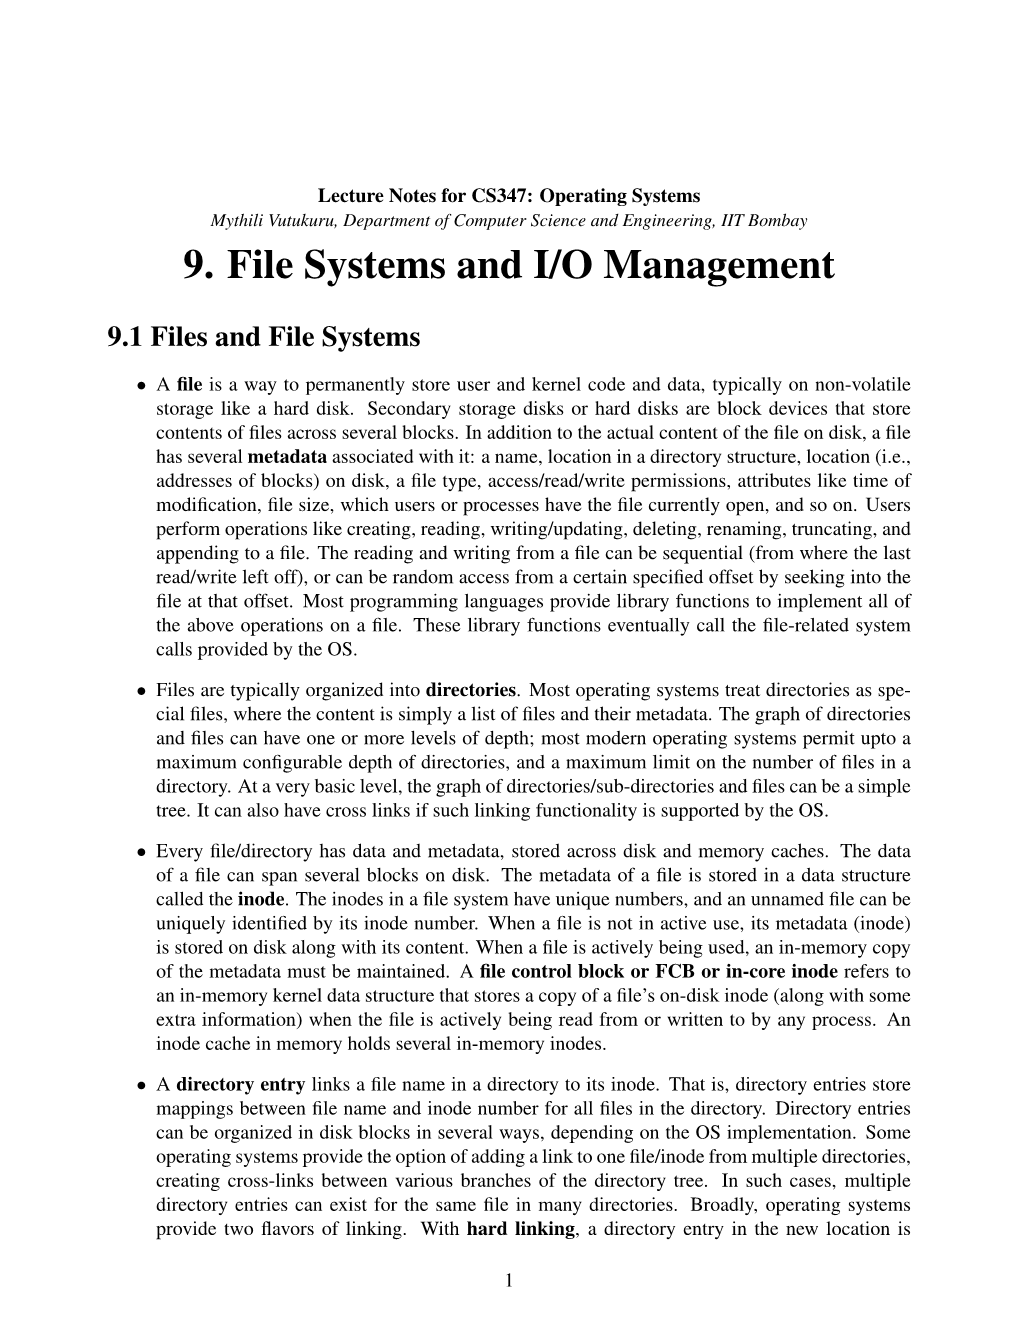 File Systems and I/O Management